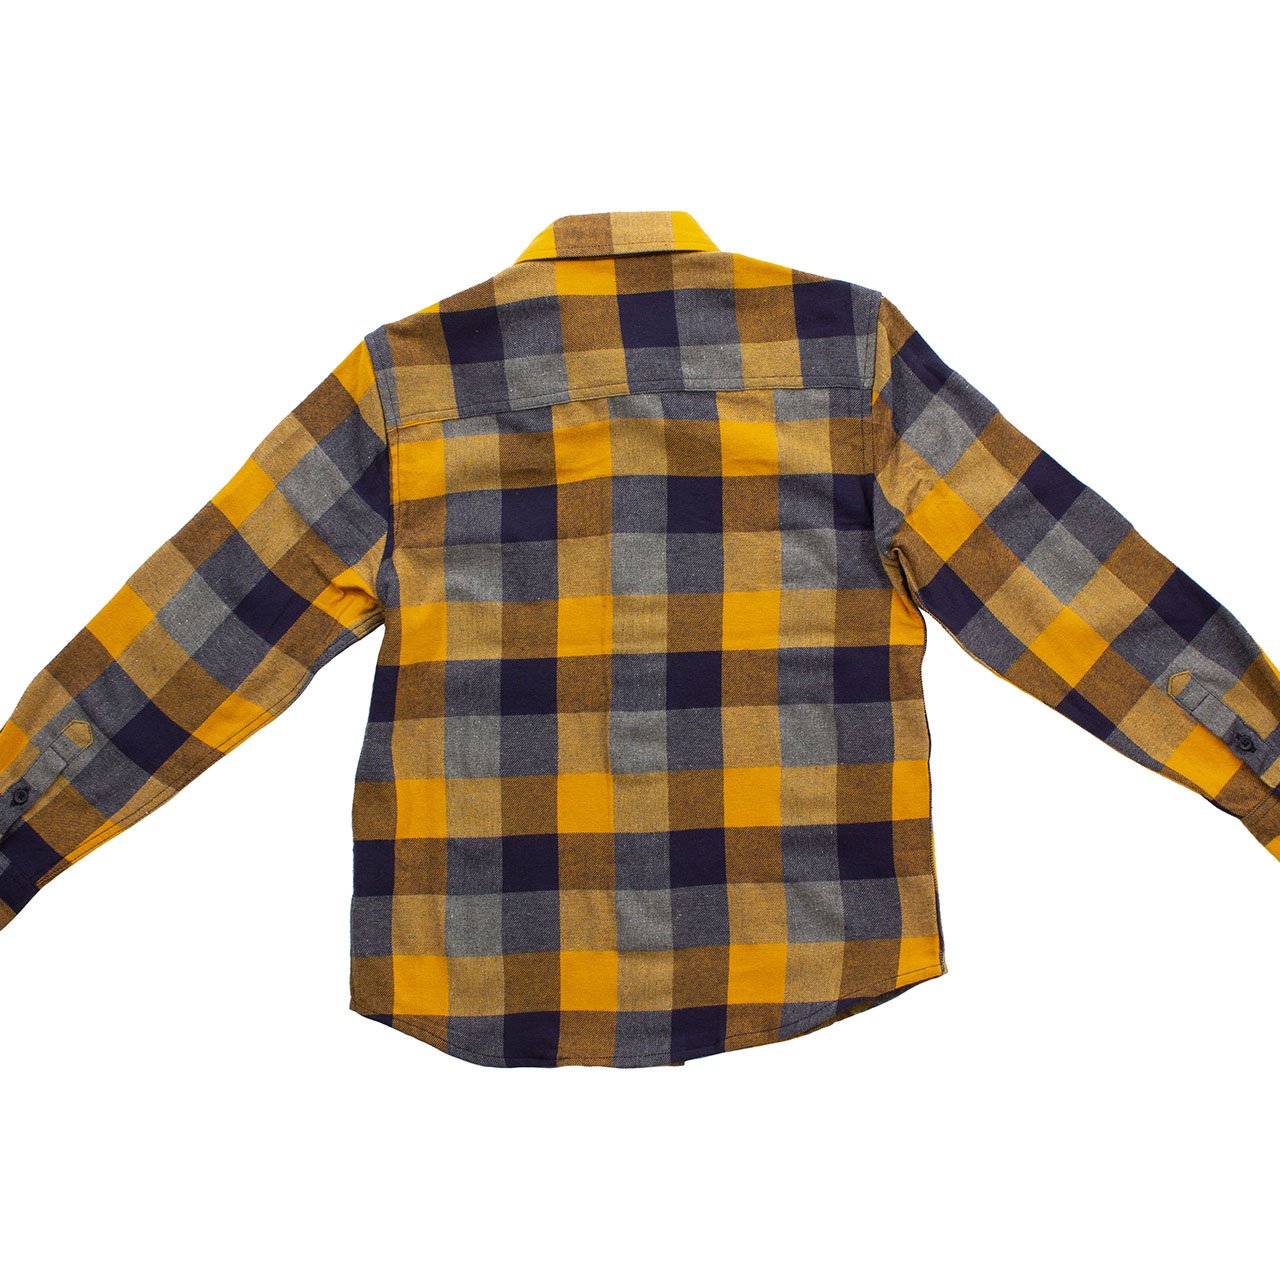 Picture of a Harvest Gold Flannel Button Up Shirt back